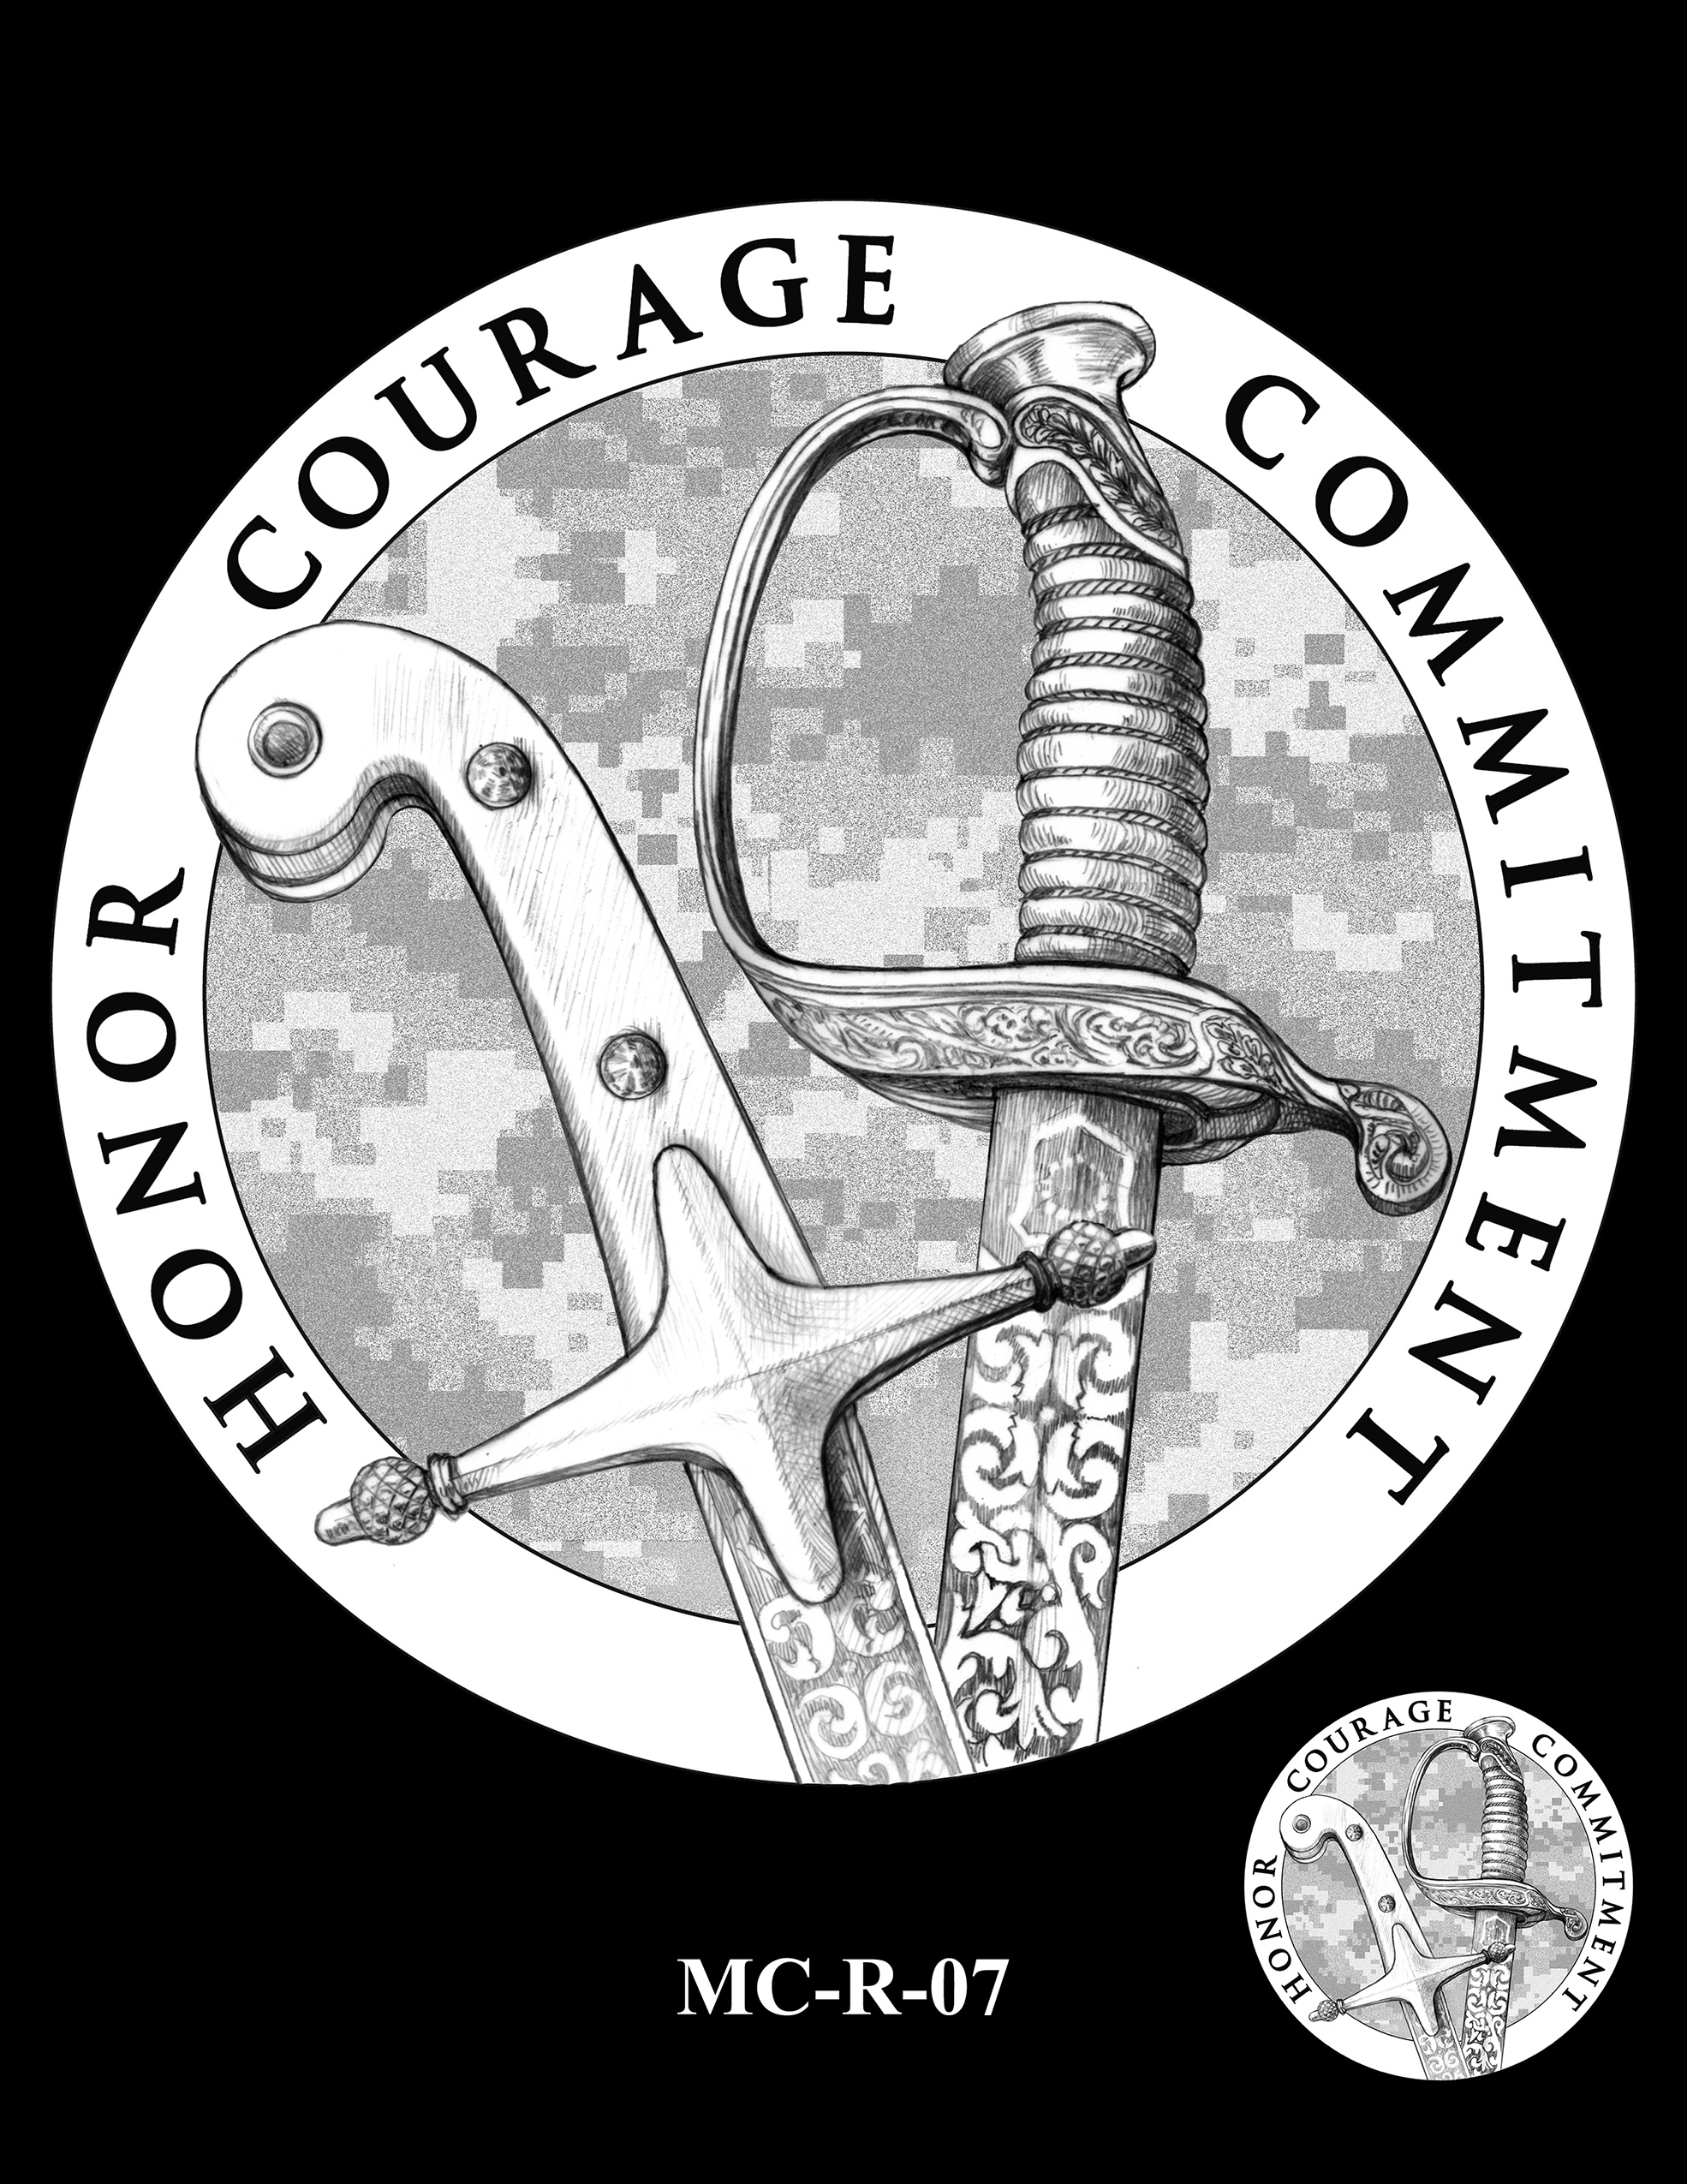 MC-R-07 -- United States Marine Corps Silver Medal